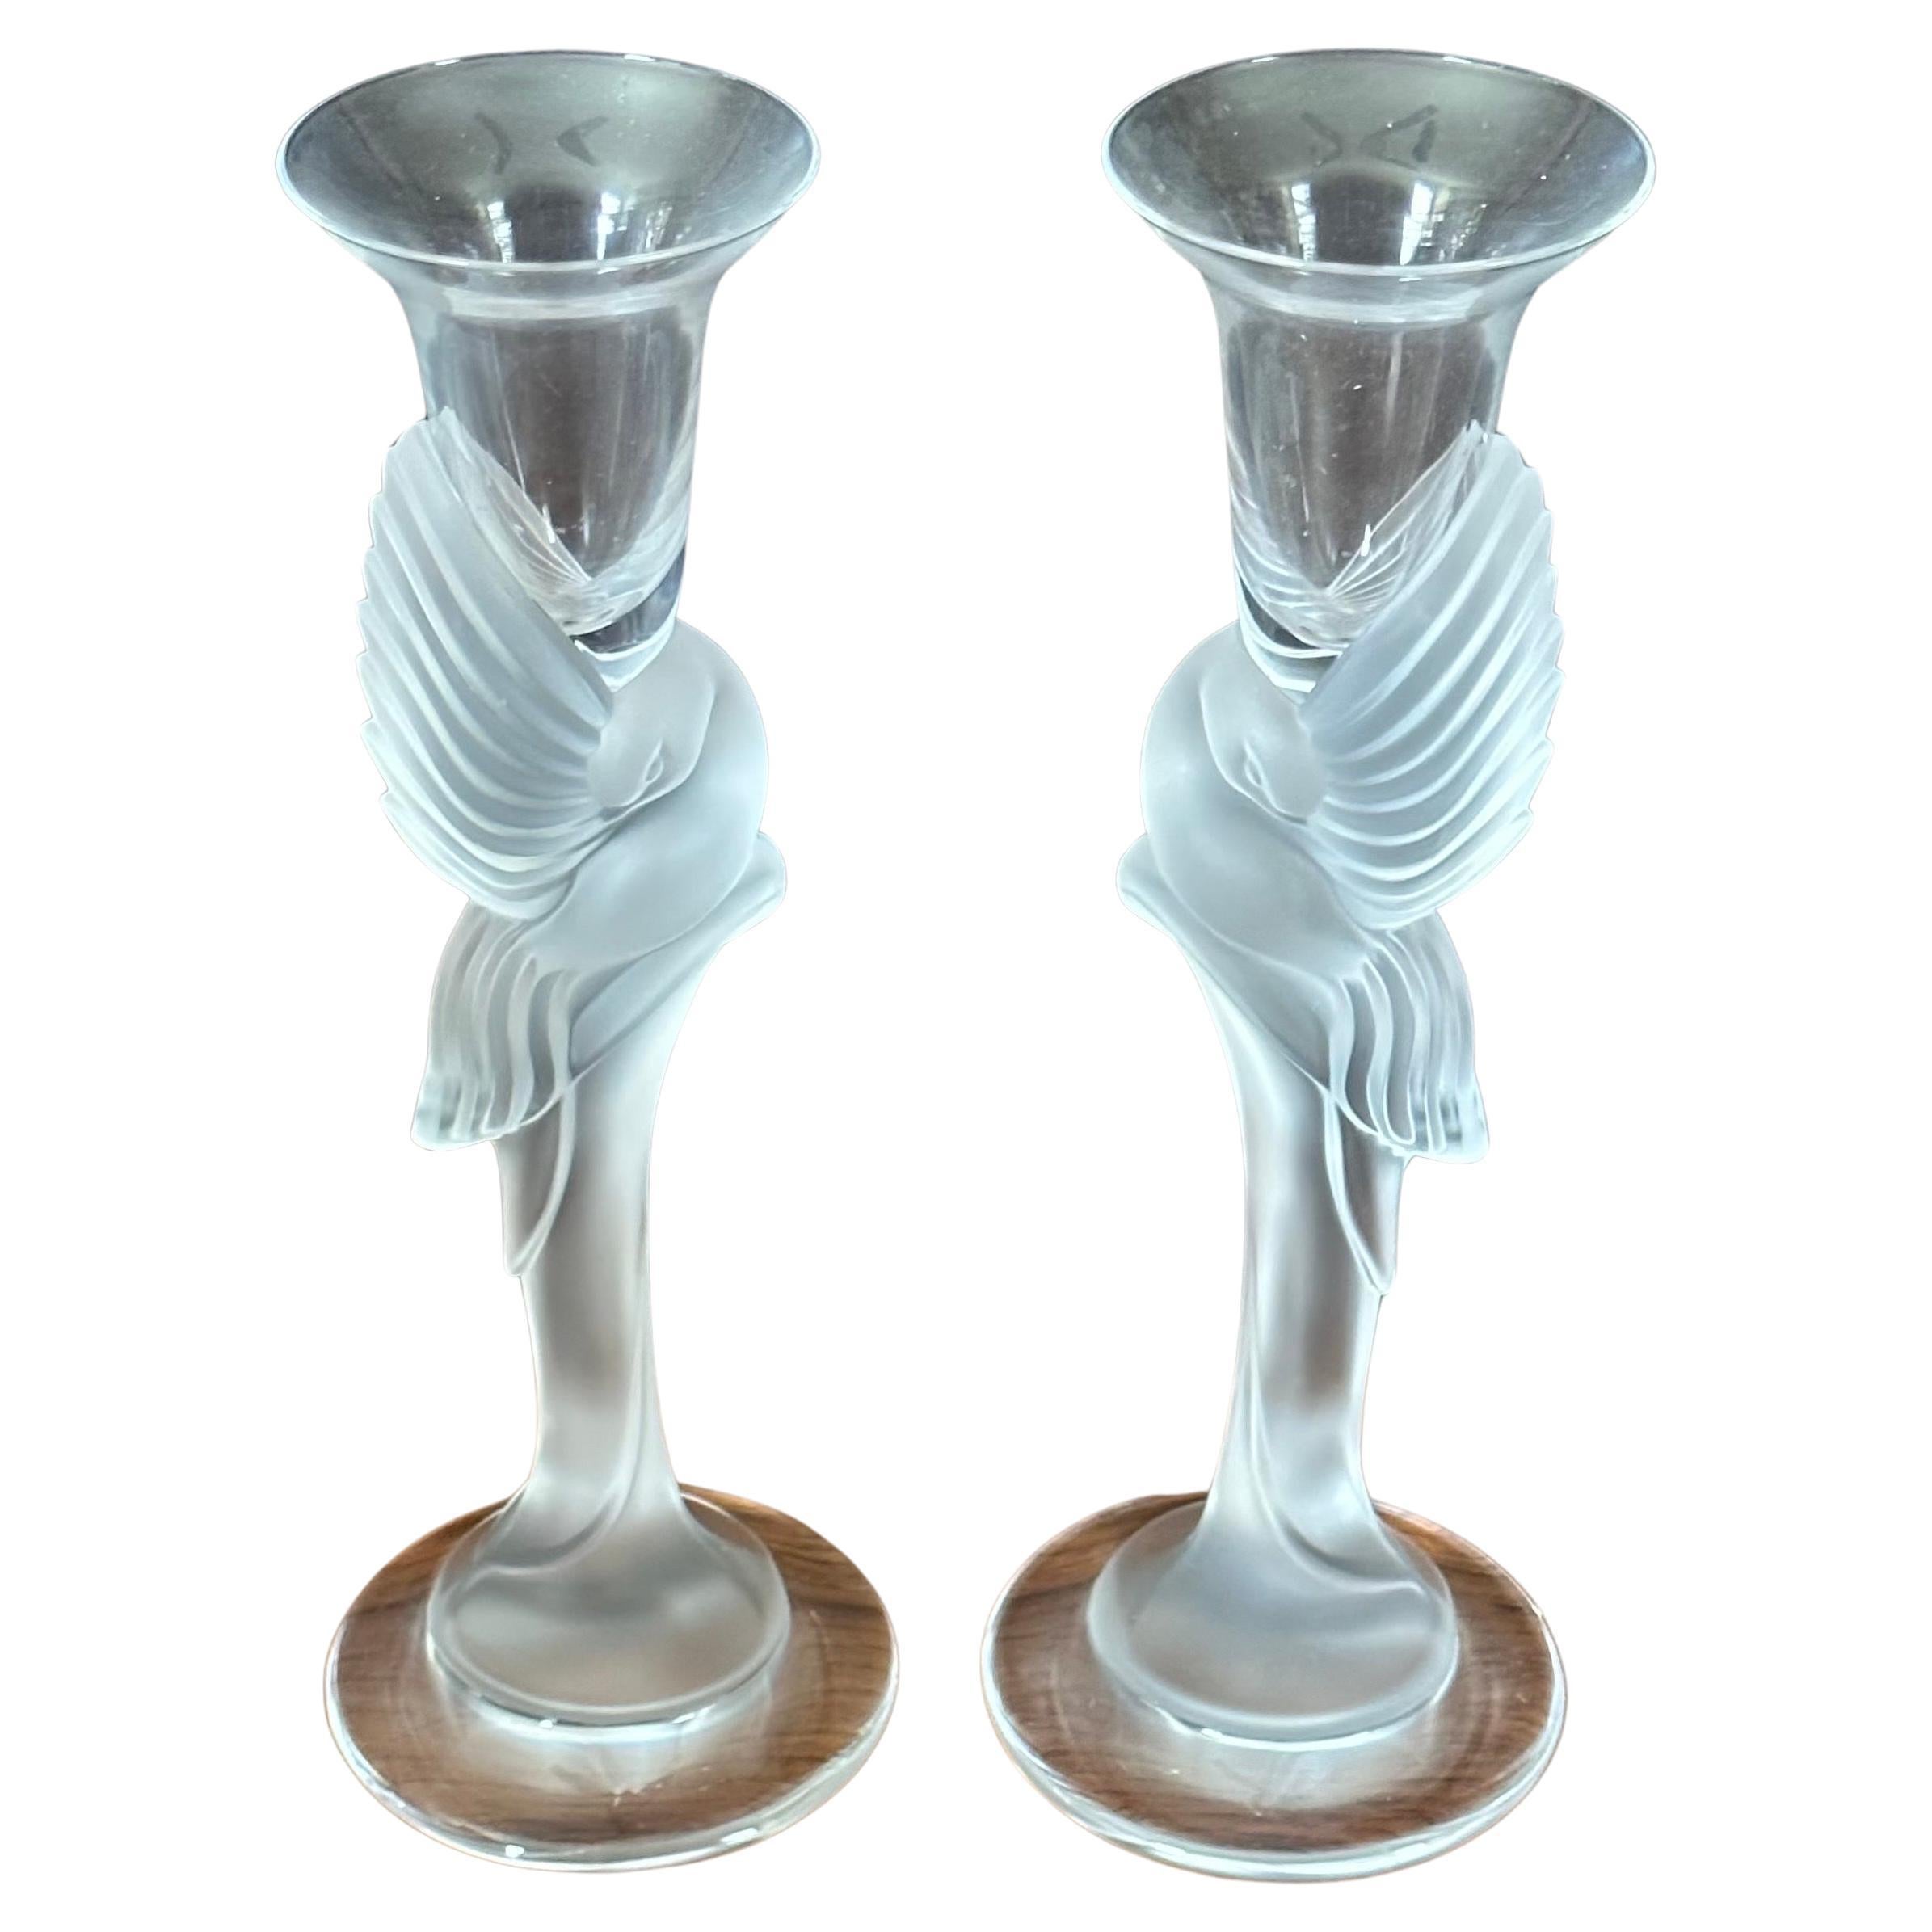 A stunning pair of frosted crystal snow dove candlesticks by Igor Carl for The House of Faberge, circa 1980s. The candlesticks are in very good condition with no chips or cracks and measure approximately 3.125